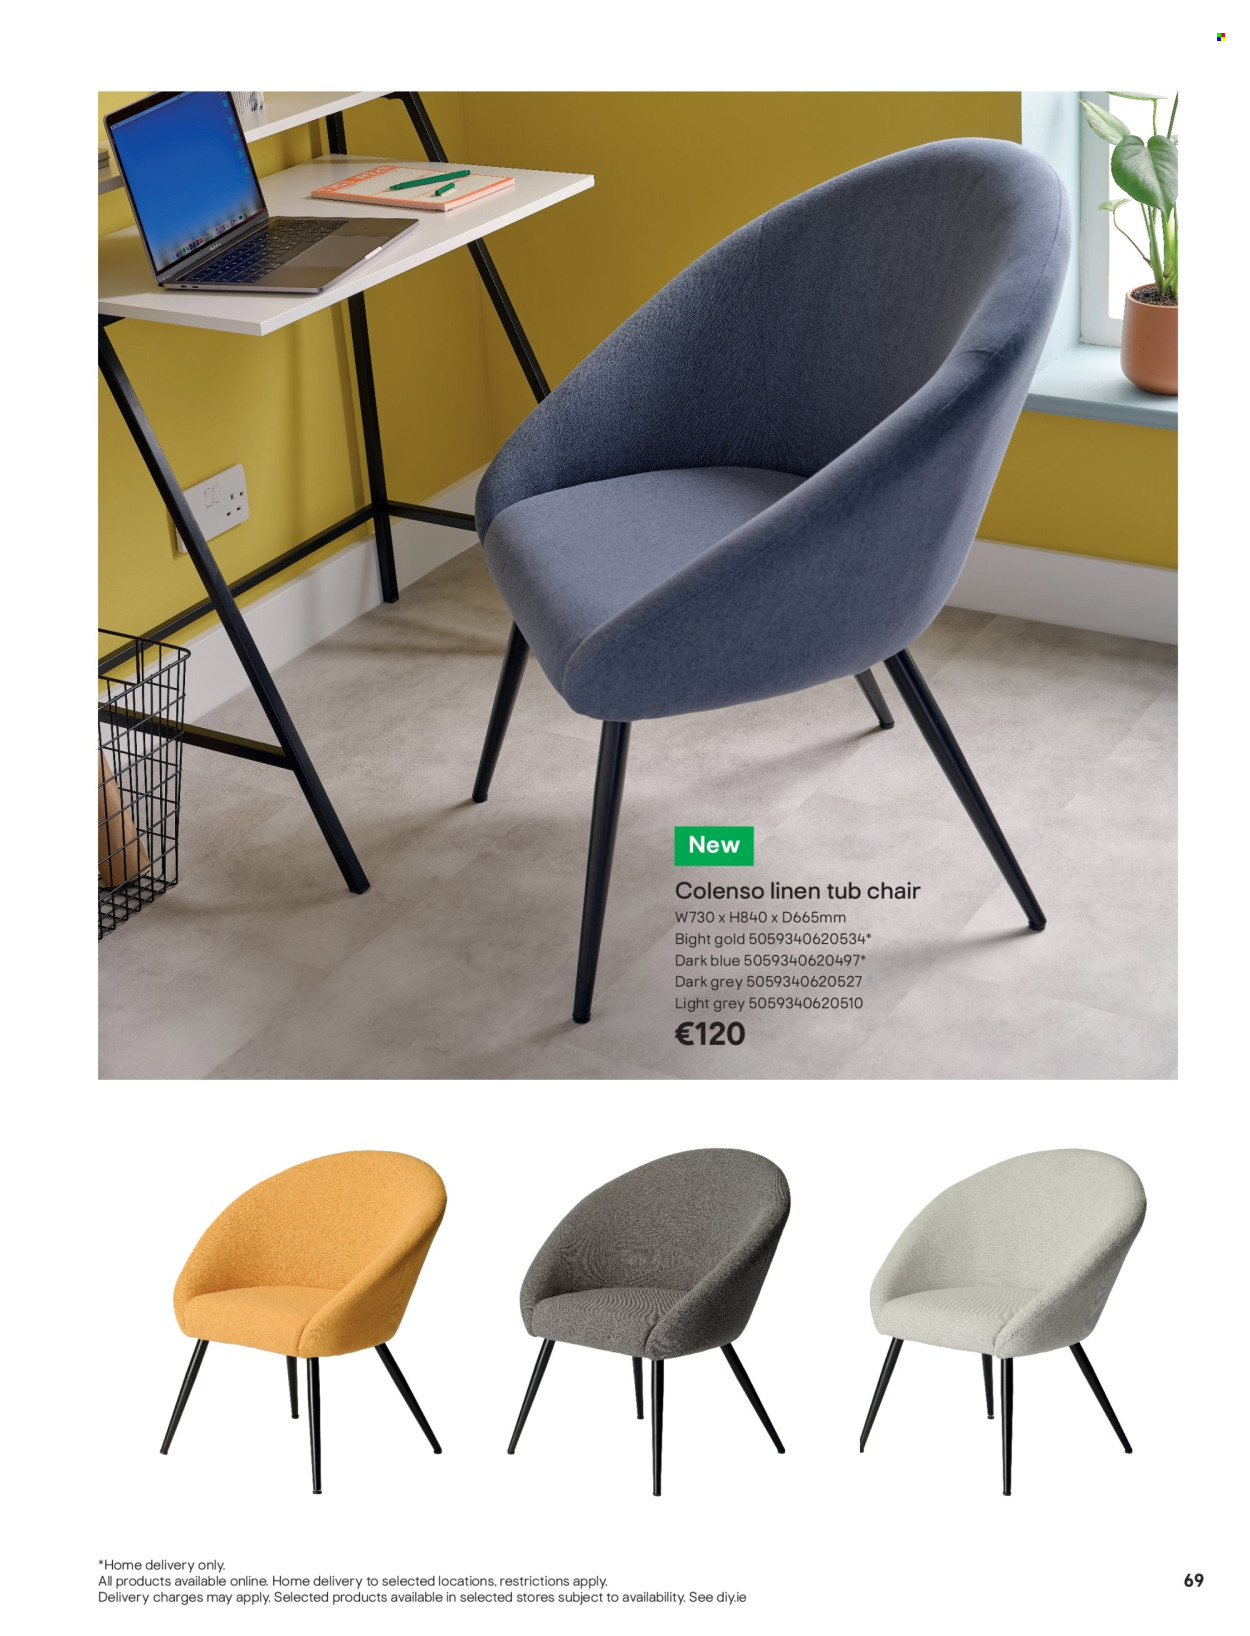 B&Q offer  - Sales products - chair, linens. Page 69.